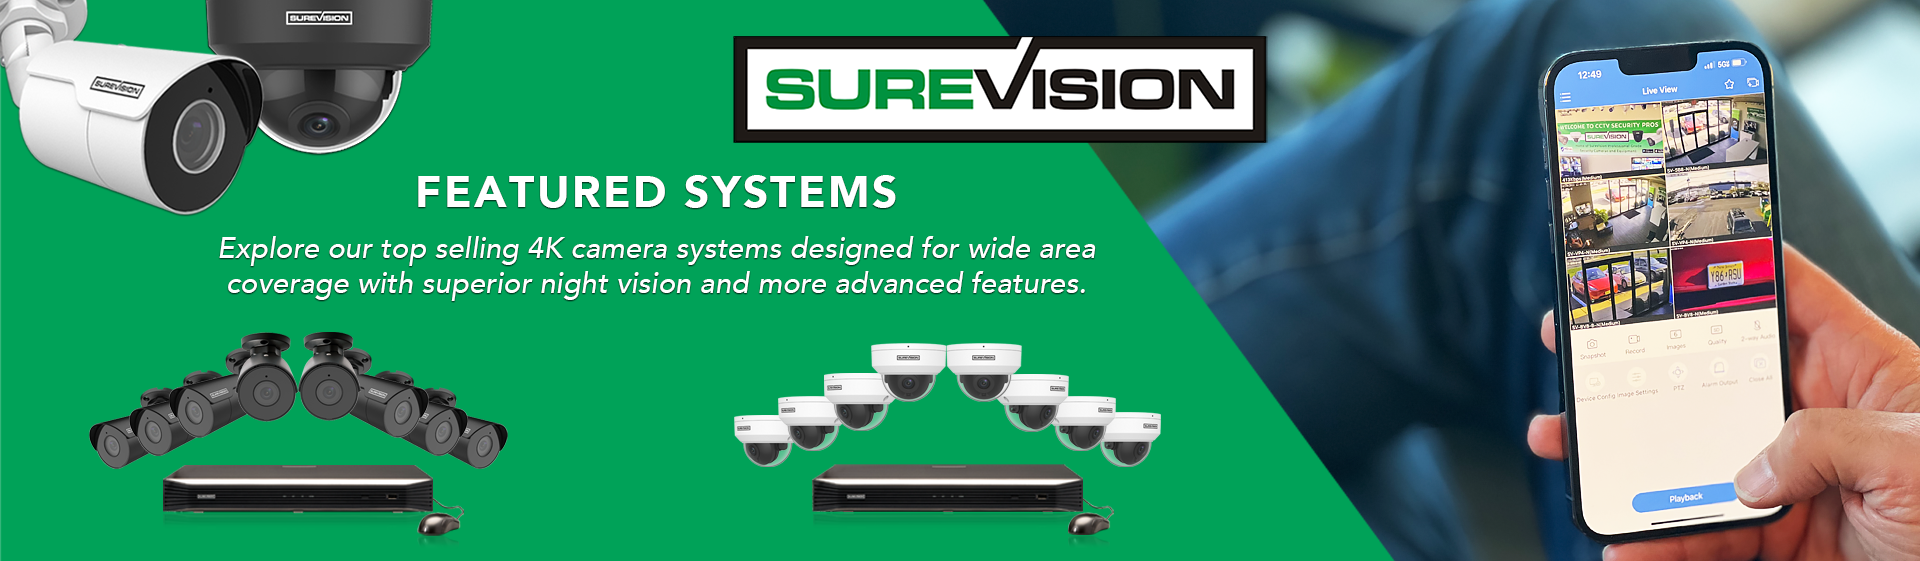 Top Selling Security Camera Systems